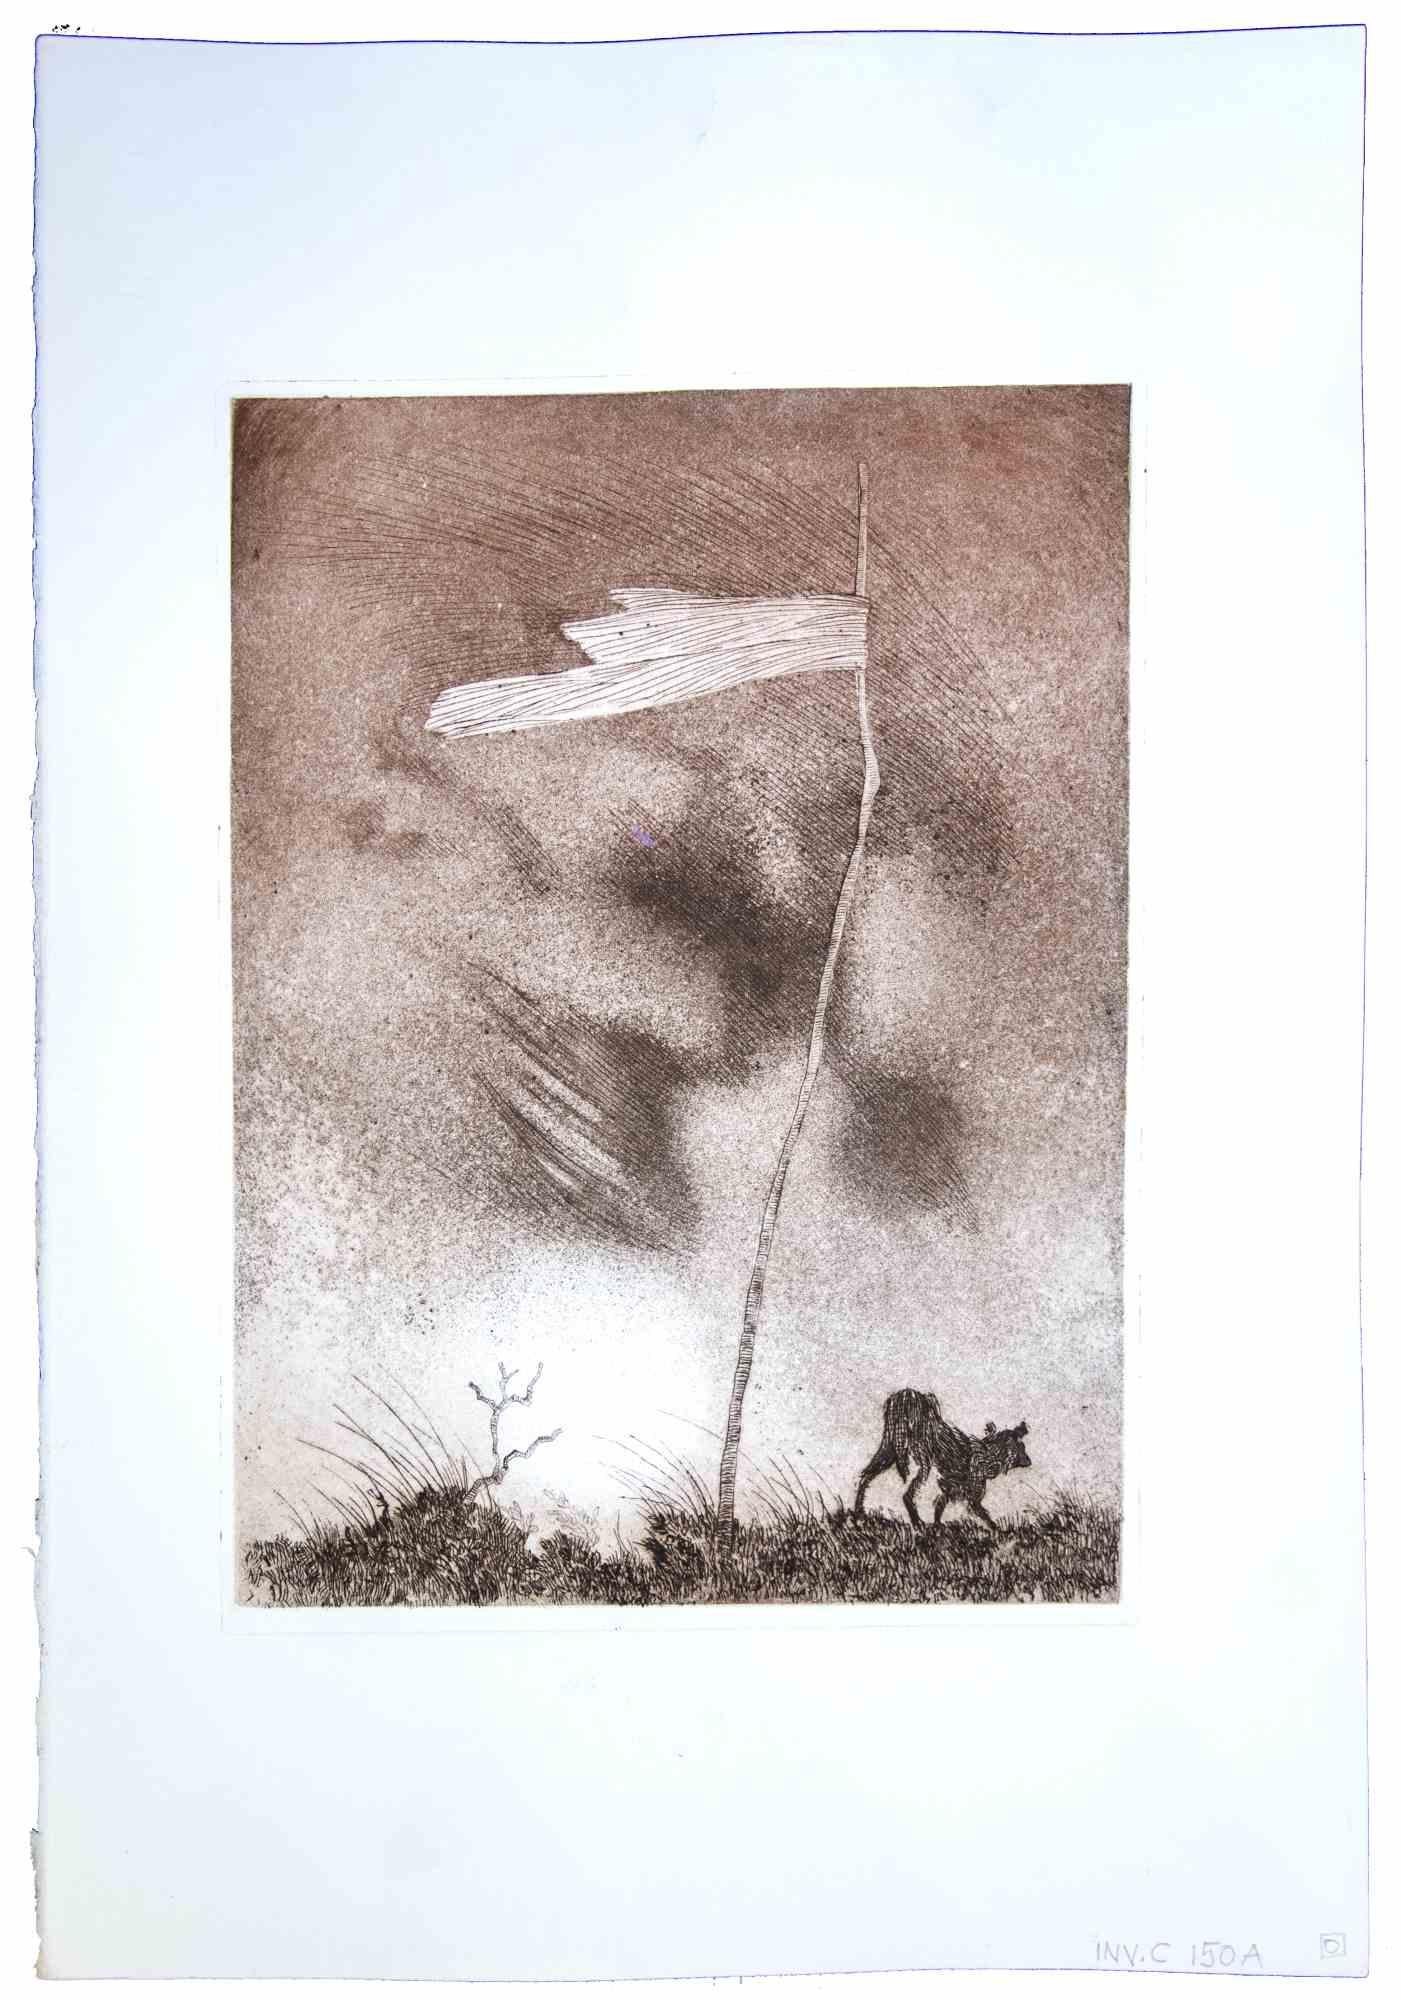 Lonley Flag is an original etching and aquatint realized by Leo Guida in 1970s.

Good condition, no signature.

Mounted on a white card1oard passpartout (50x34 cm).

Leo Guida  (1992 - 2017). Sensitive to current issues, artistic movements and